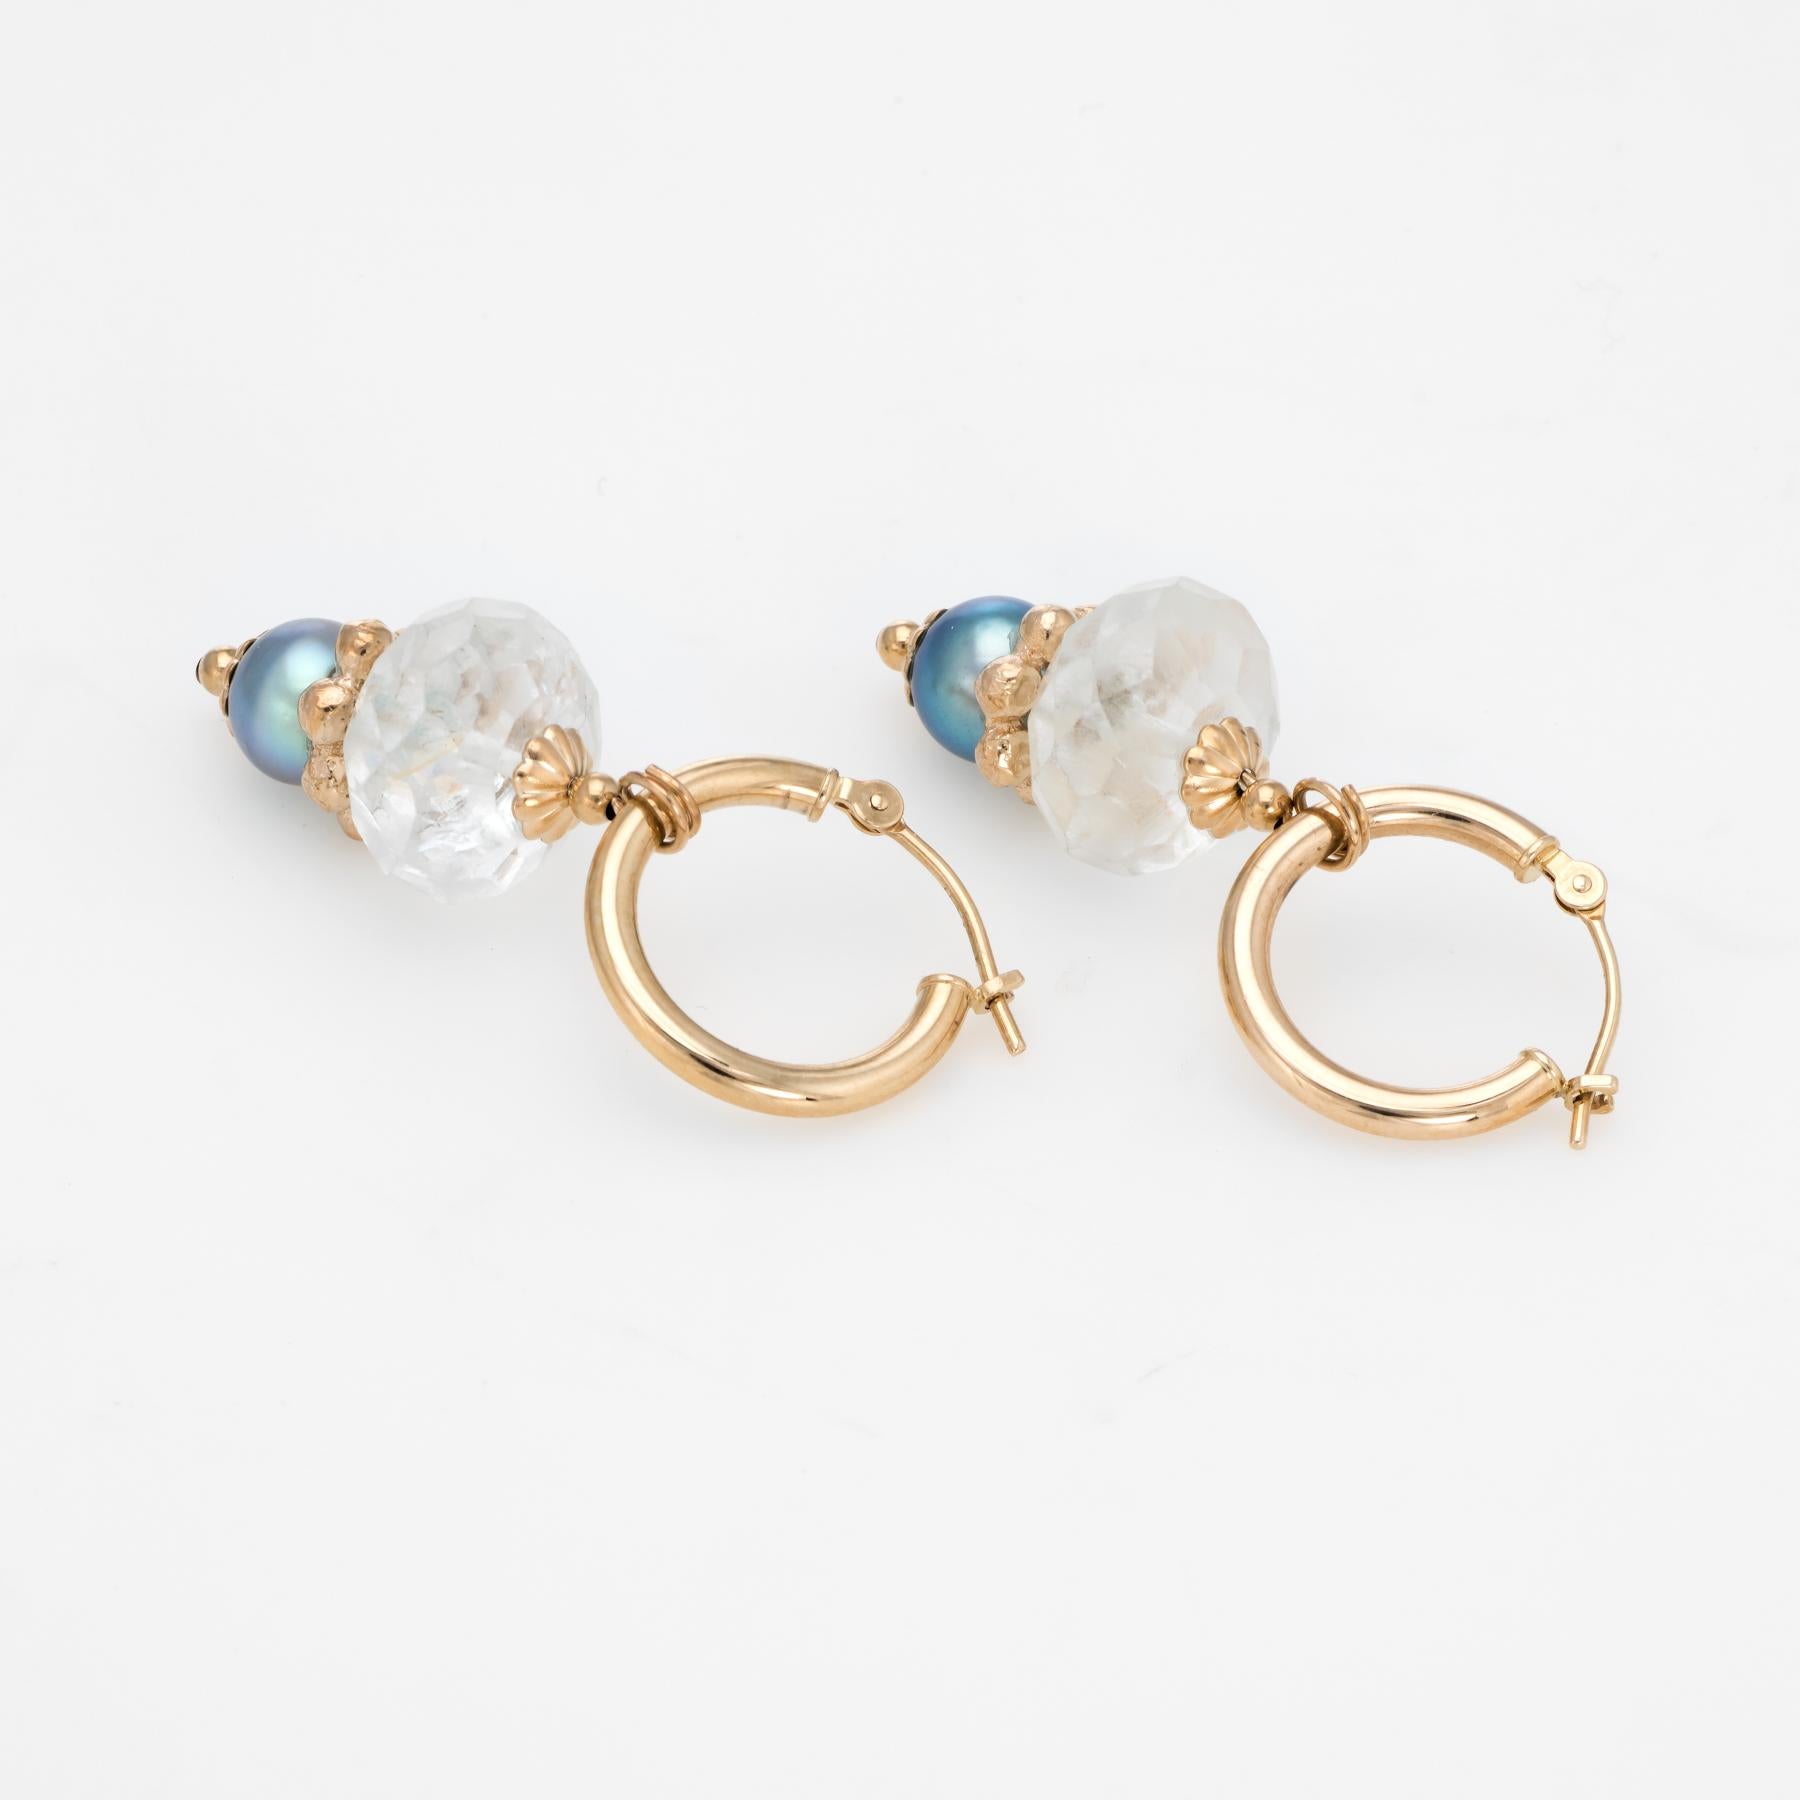 Elegant pair of estate cultured pearl & white quartz hoop earrings, crafted in 14k yellow gold. 

Cultured black pearls each measure 6.5mm. The faceted white quartz measures 12mm. 

The stones each securely set into the mounts. The drops are